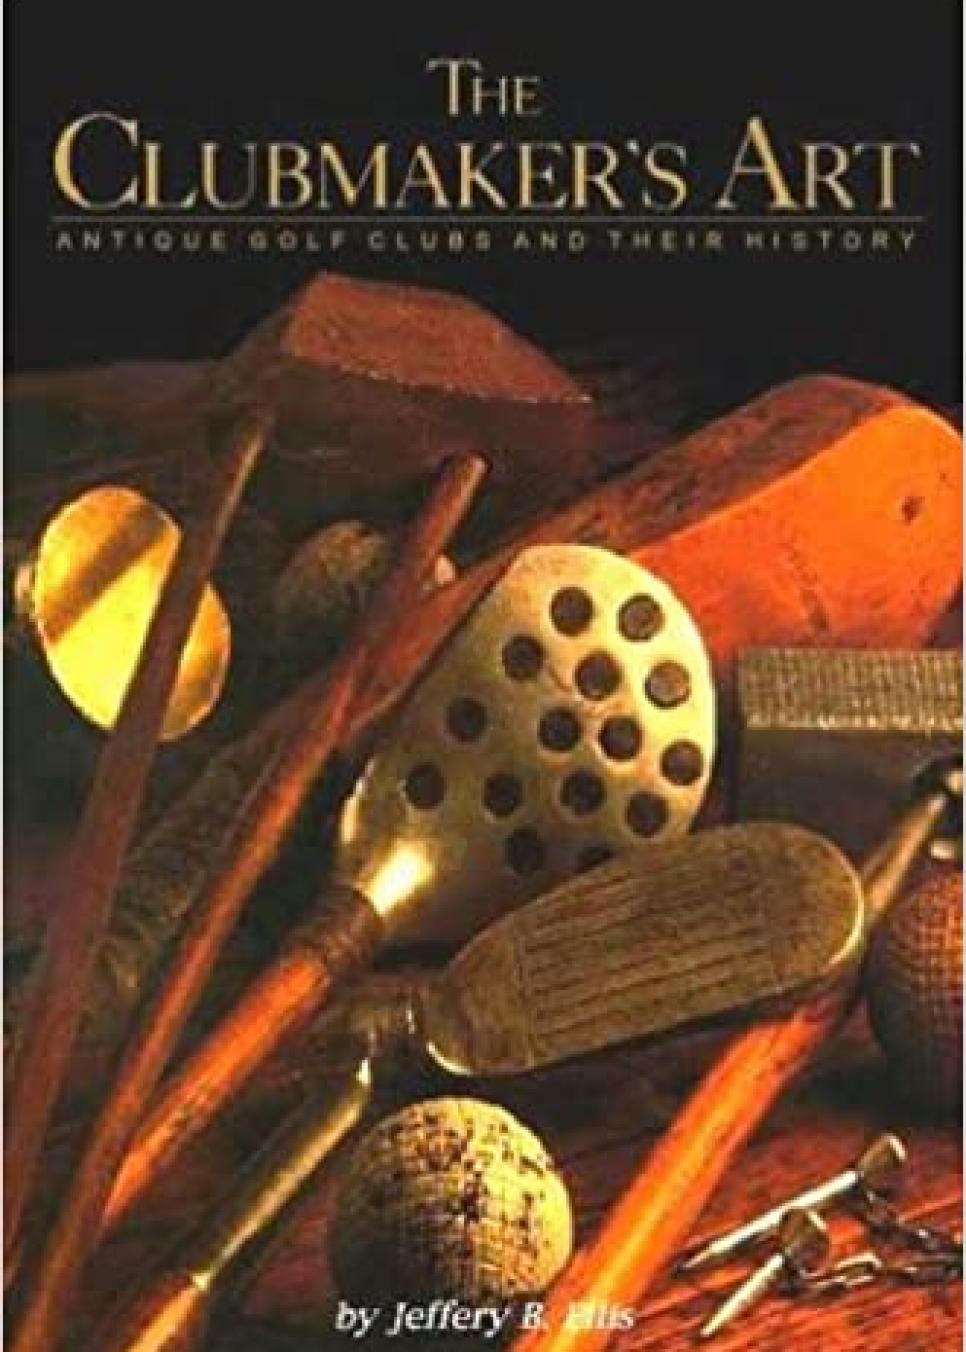 rx-amazonthe-clubmakers-art-antique-golf-clubs-and-their-history-by-jeffery-b-ellis-1997.jpeg